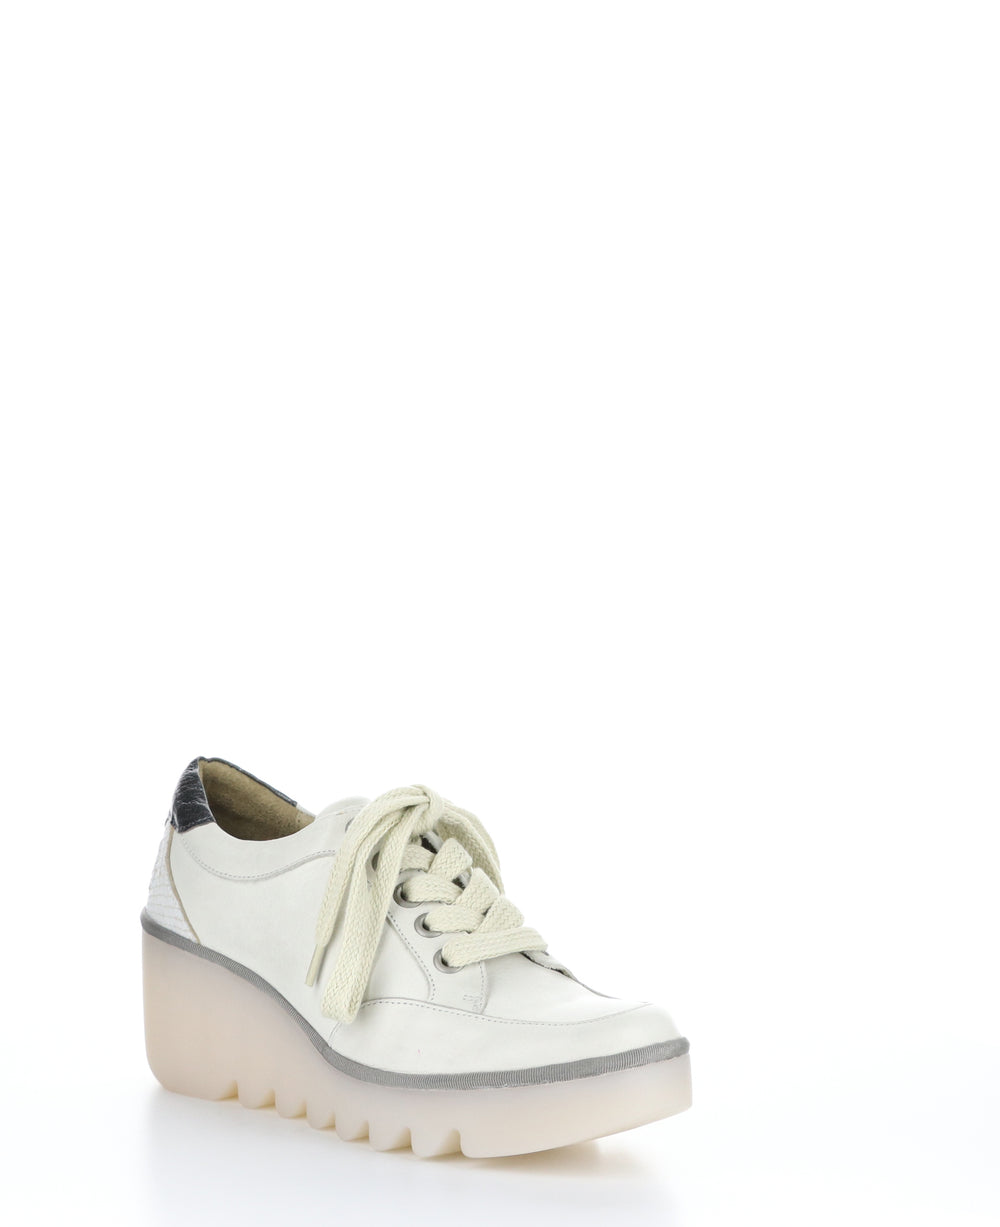 BINO347FLY Off White/Graph Round Toe Shoes